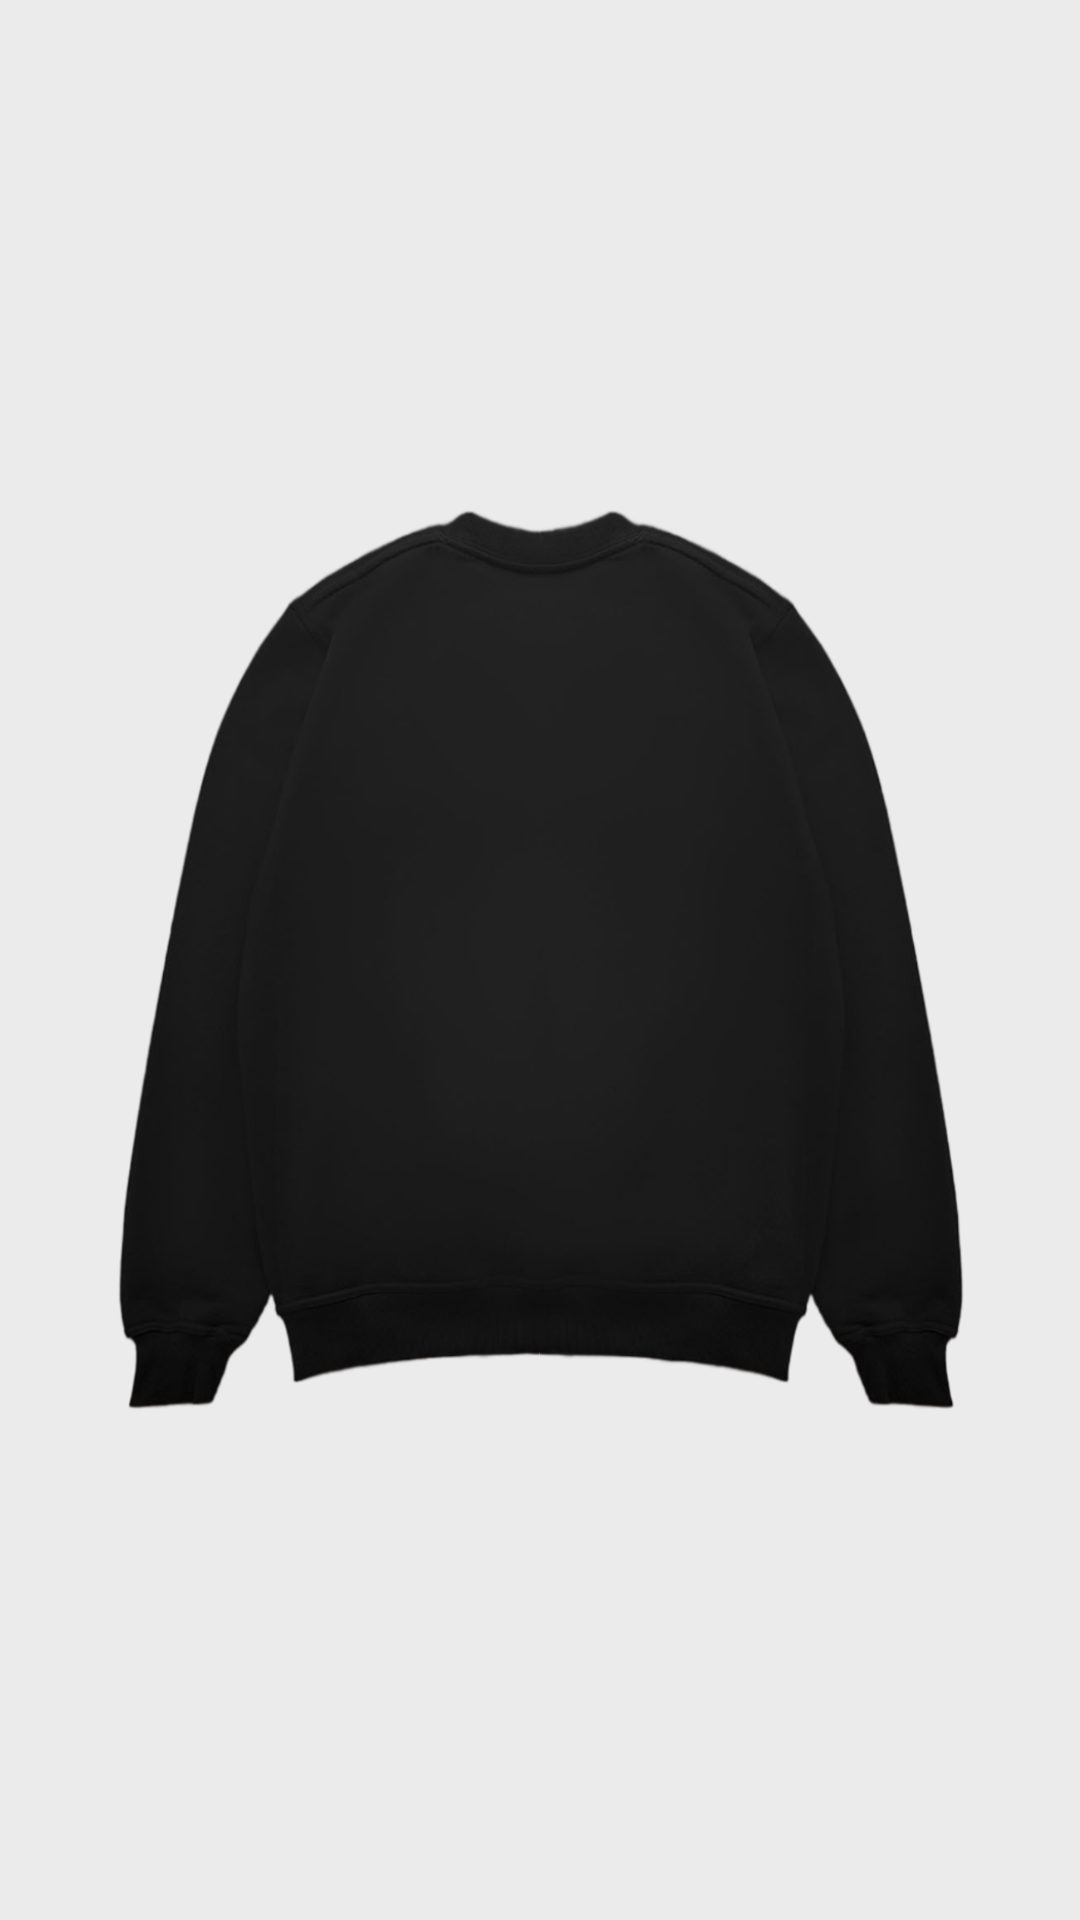 The Repeat Inspiration Sweater - Attractedtoblack